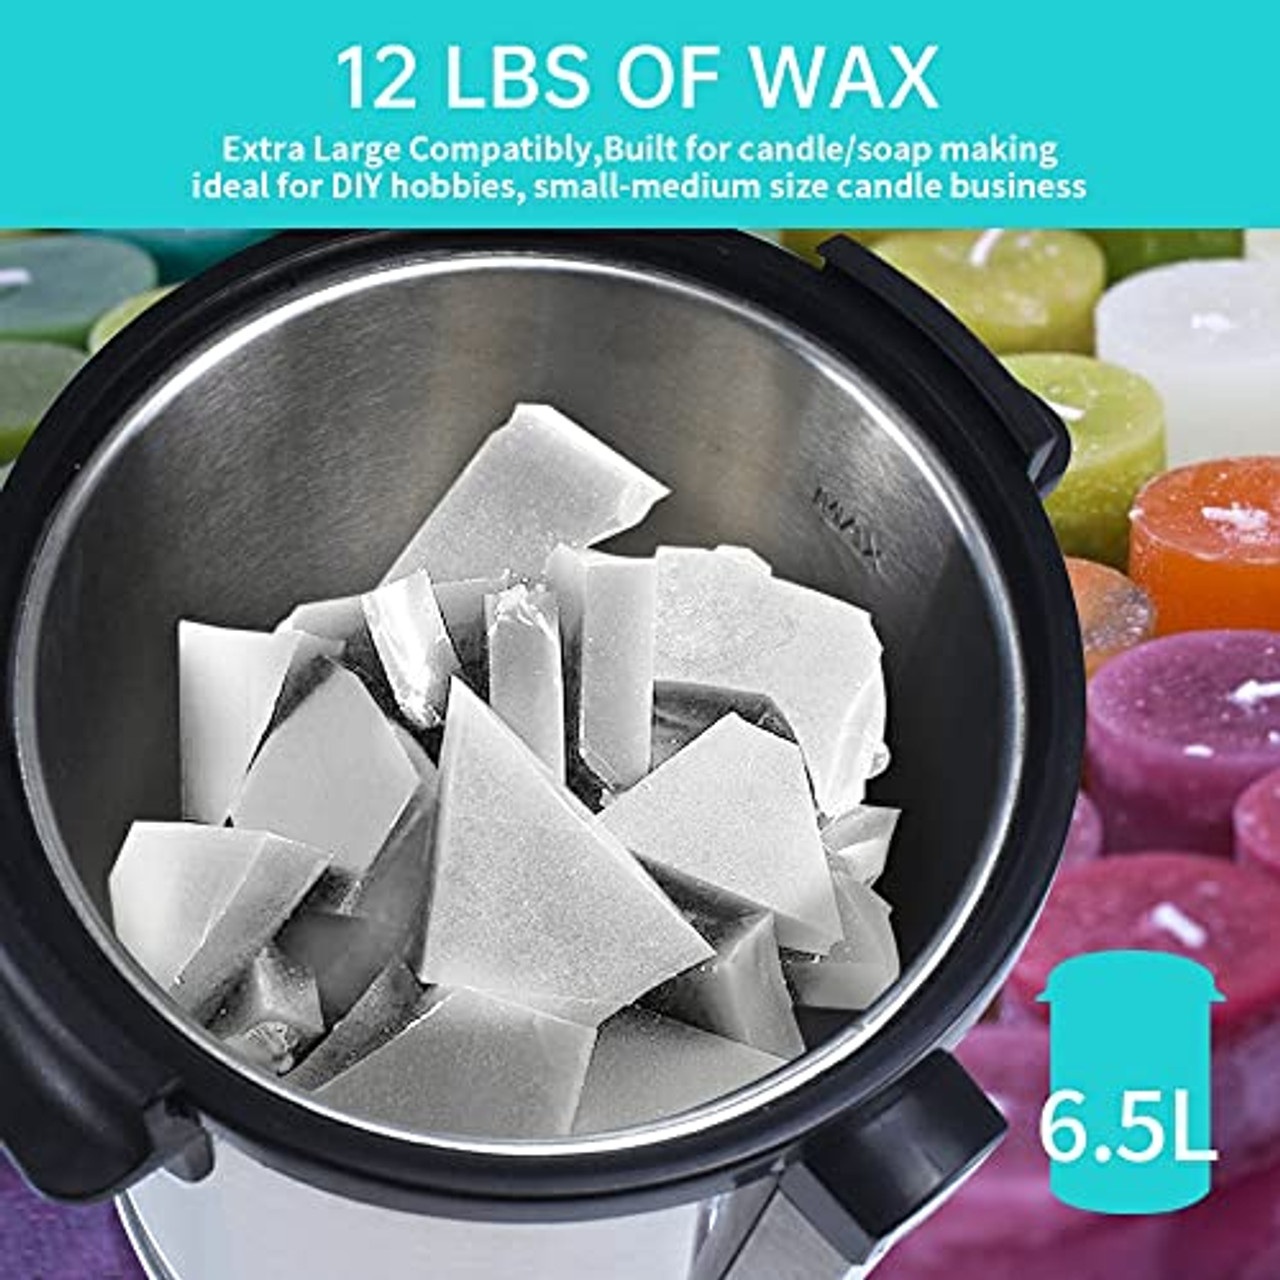 17.5 LB Wax Melter for Candle Making: Electric Aluminum Wax Melting Pot  Machine Regular Size Quick-pour Spout and Free Ebook 